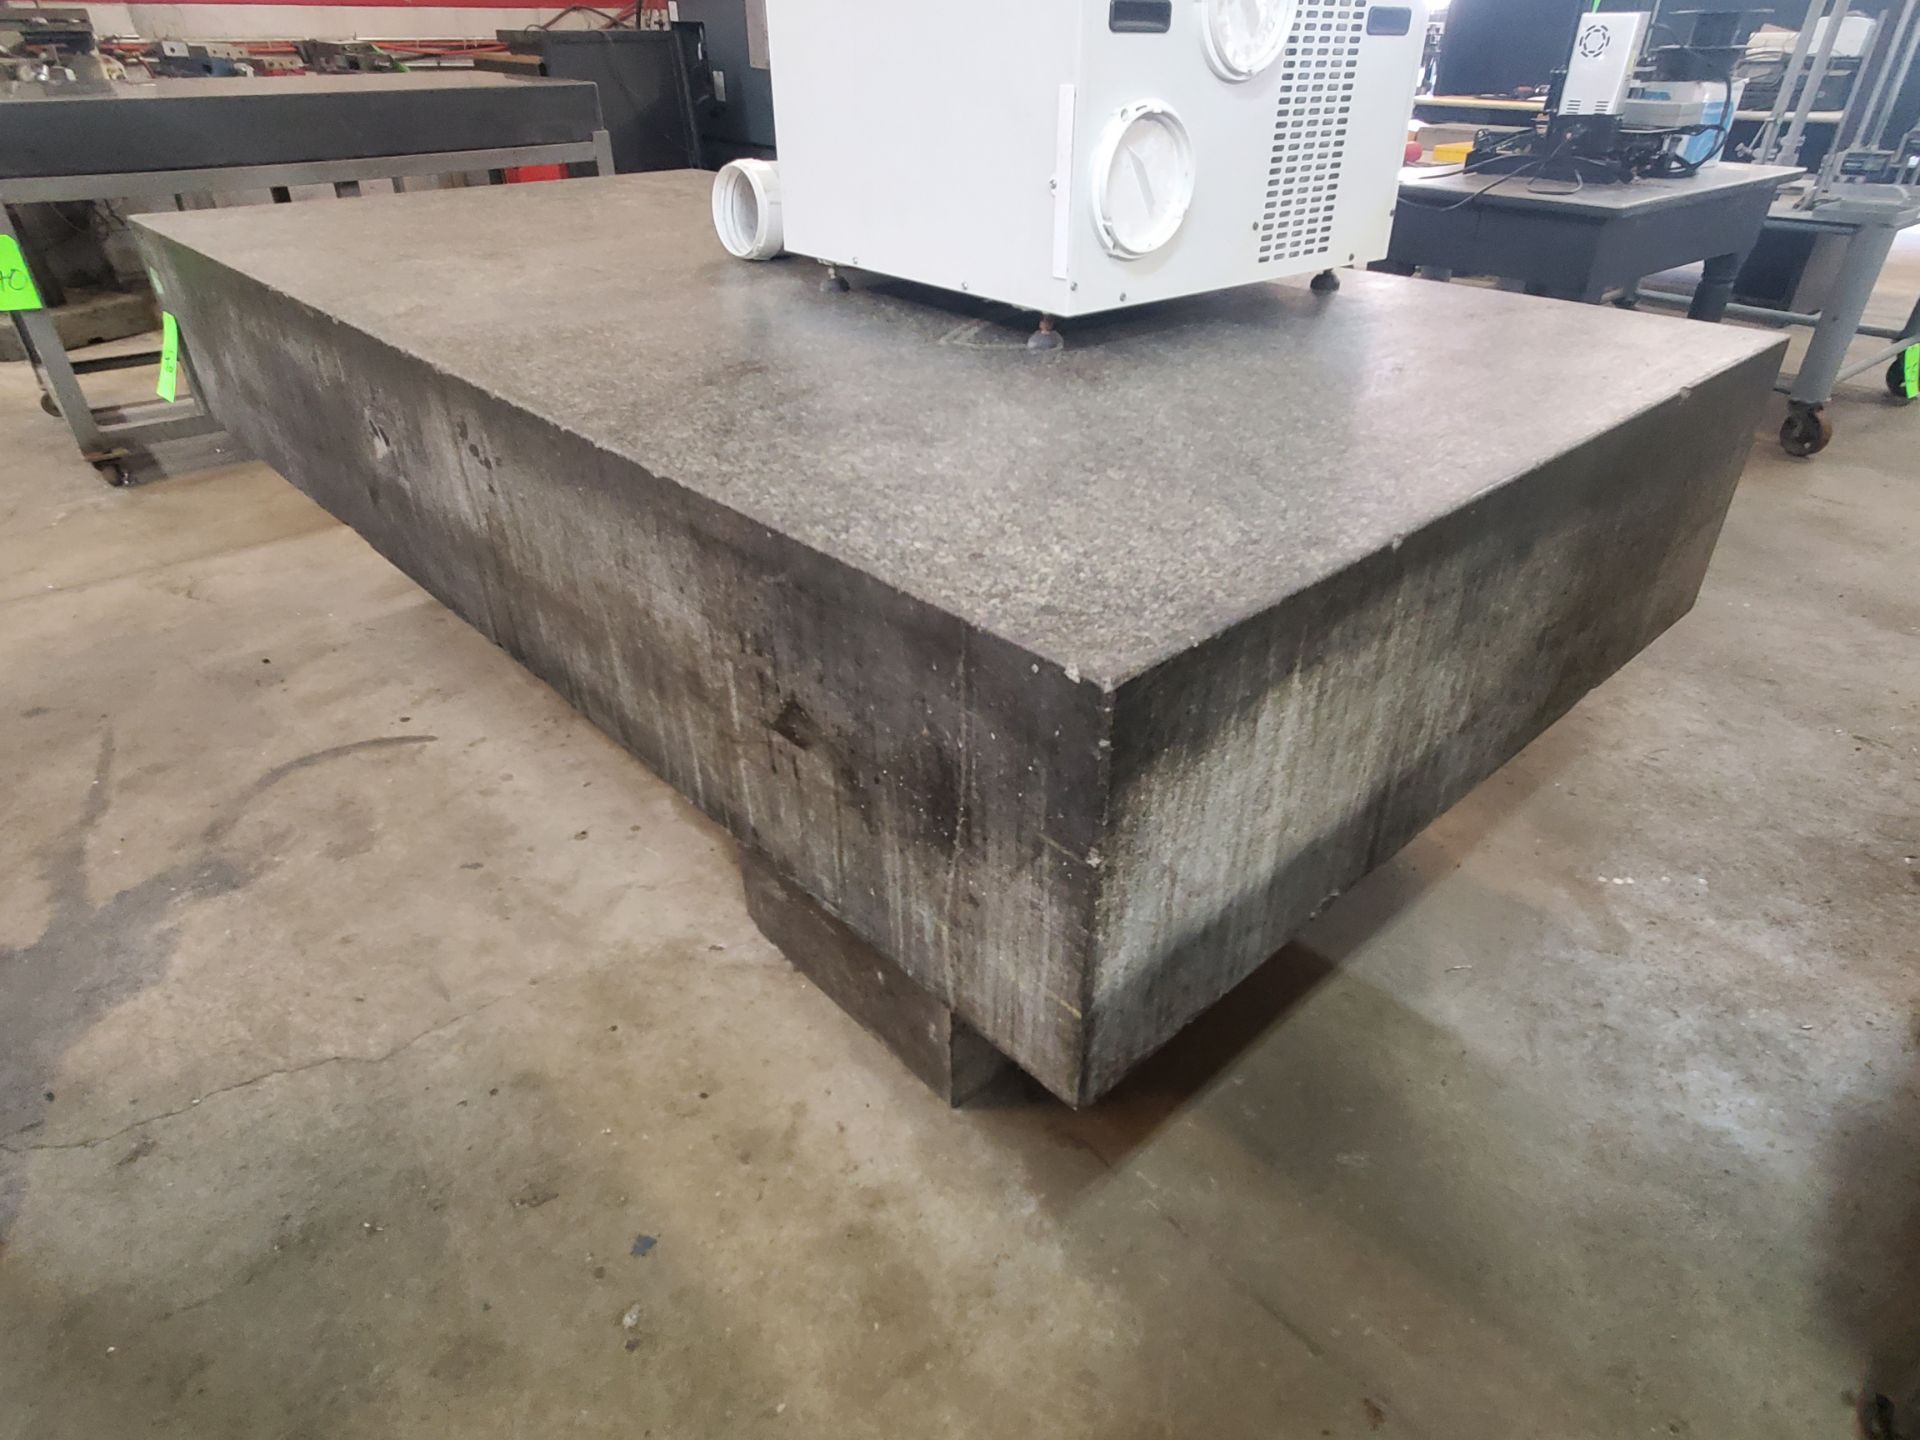 Granite Table w/ Stand, 96" x 48" x 14" - Image 3 of 5